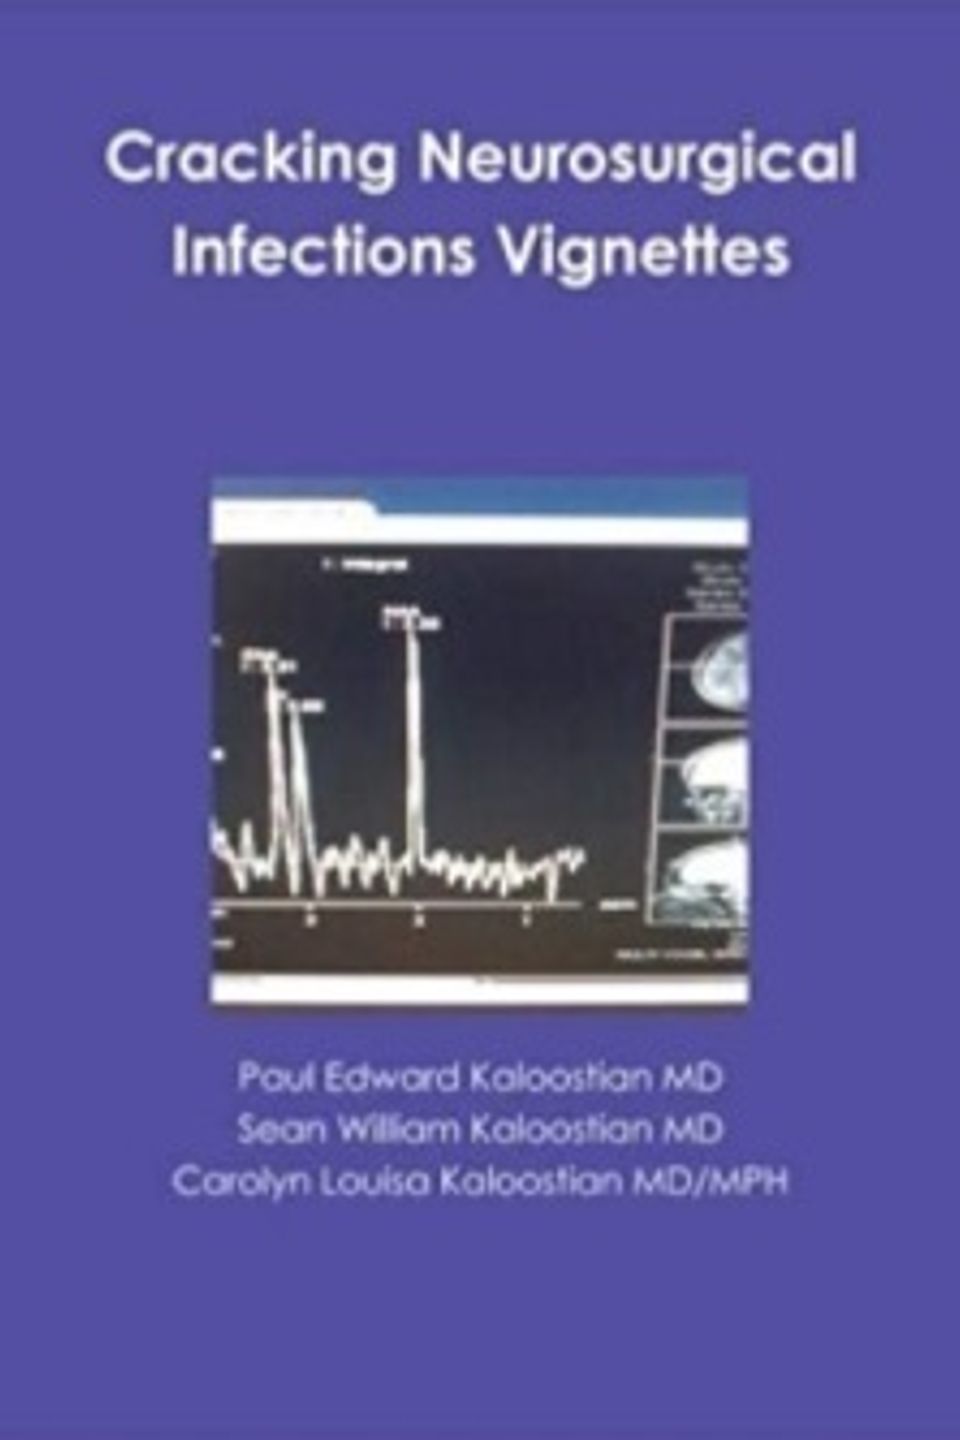 Cracking neurosurgical infections vignettes